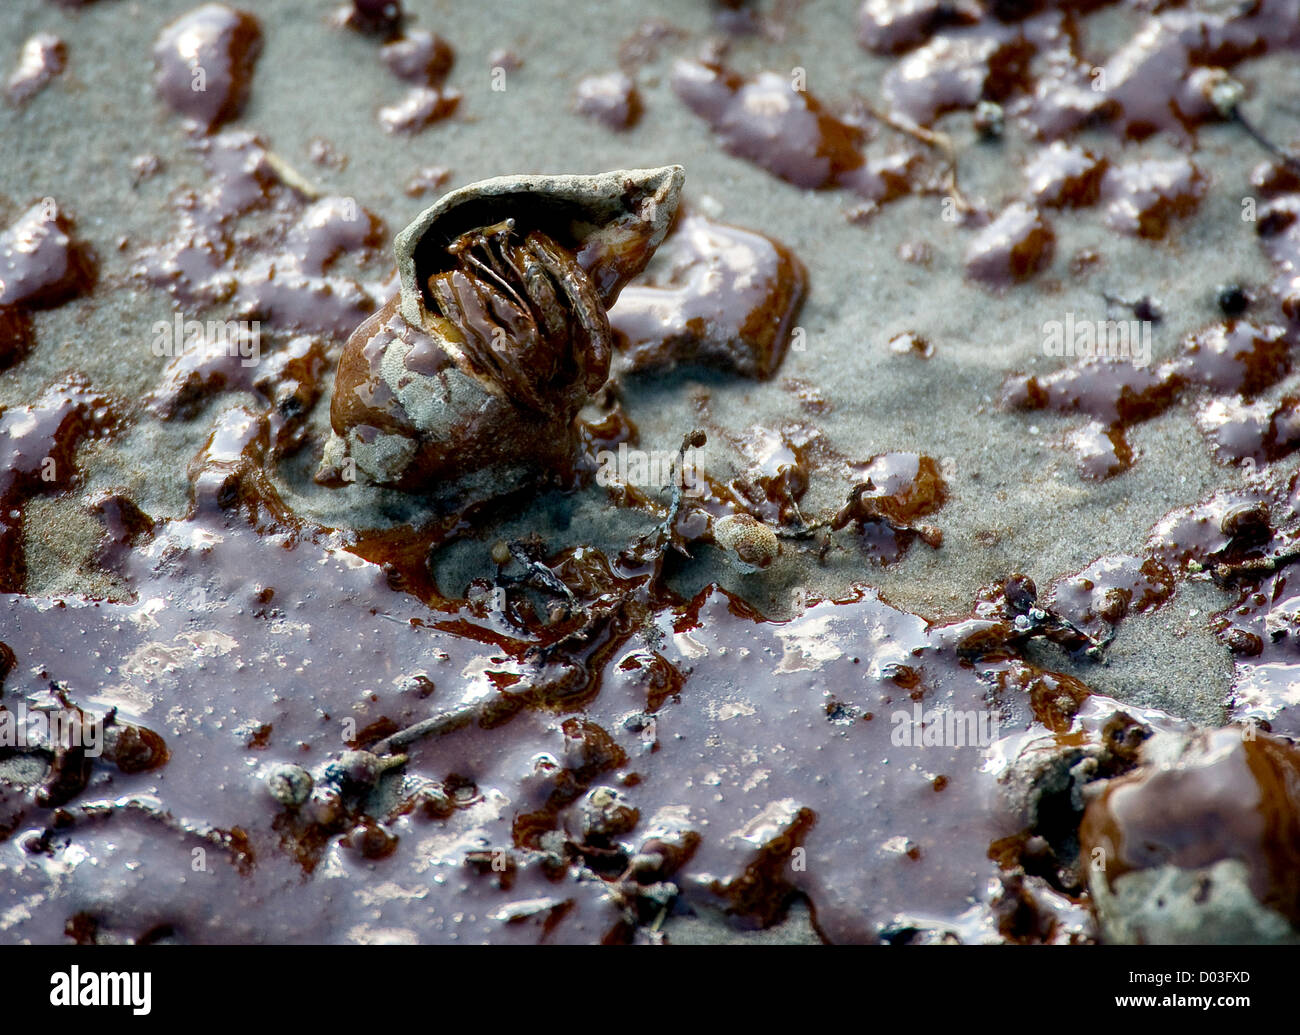 Nov. 15, 2012 - BP has agreed to plead guilty to felony charges and pay $4.5 billion in penalties for the Deepwater Horizon oil-rig accident and spill. PICTURED:  June 10, 2010 - Grand Island, Louisiana, U.S. - A live hermit crab is mired in thick oil from the Deepwater Horizon oil spill on Grand Isle. Oil continues to wash a shore on Grand Isle and many residents are very angry. (Credit Image: © Robin Loznak/ZUMApress.com) Stock Photo